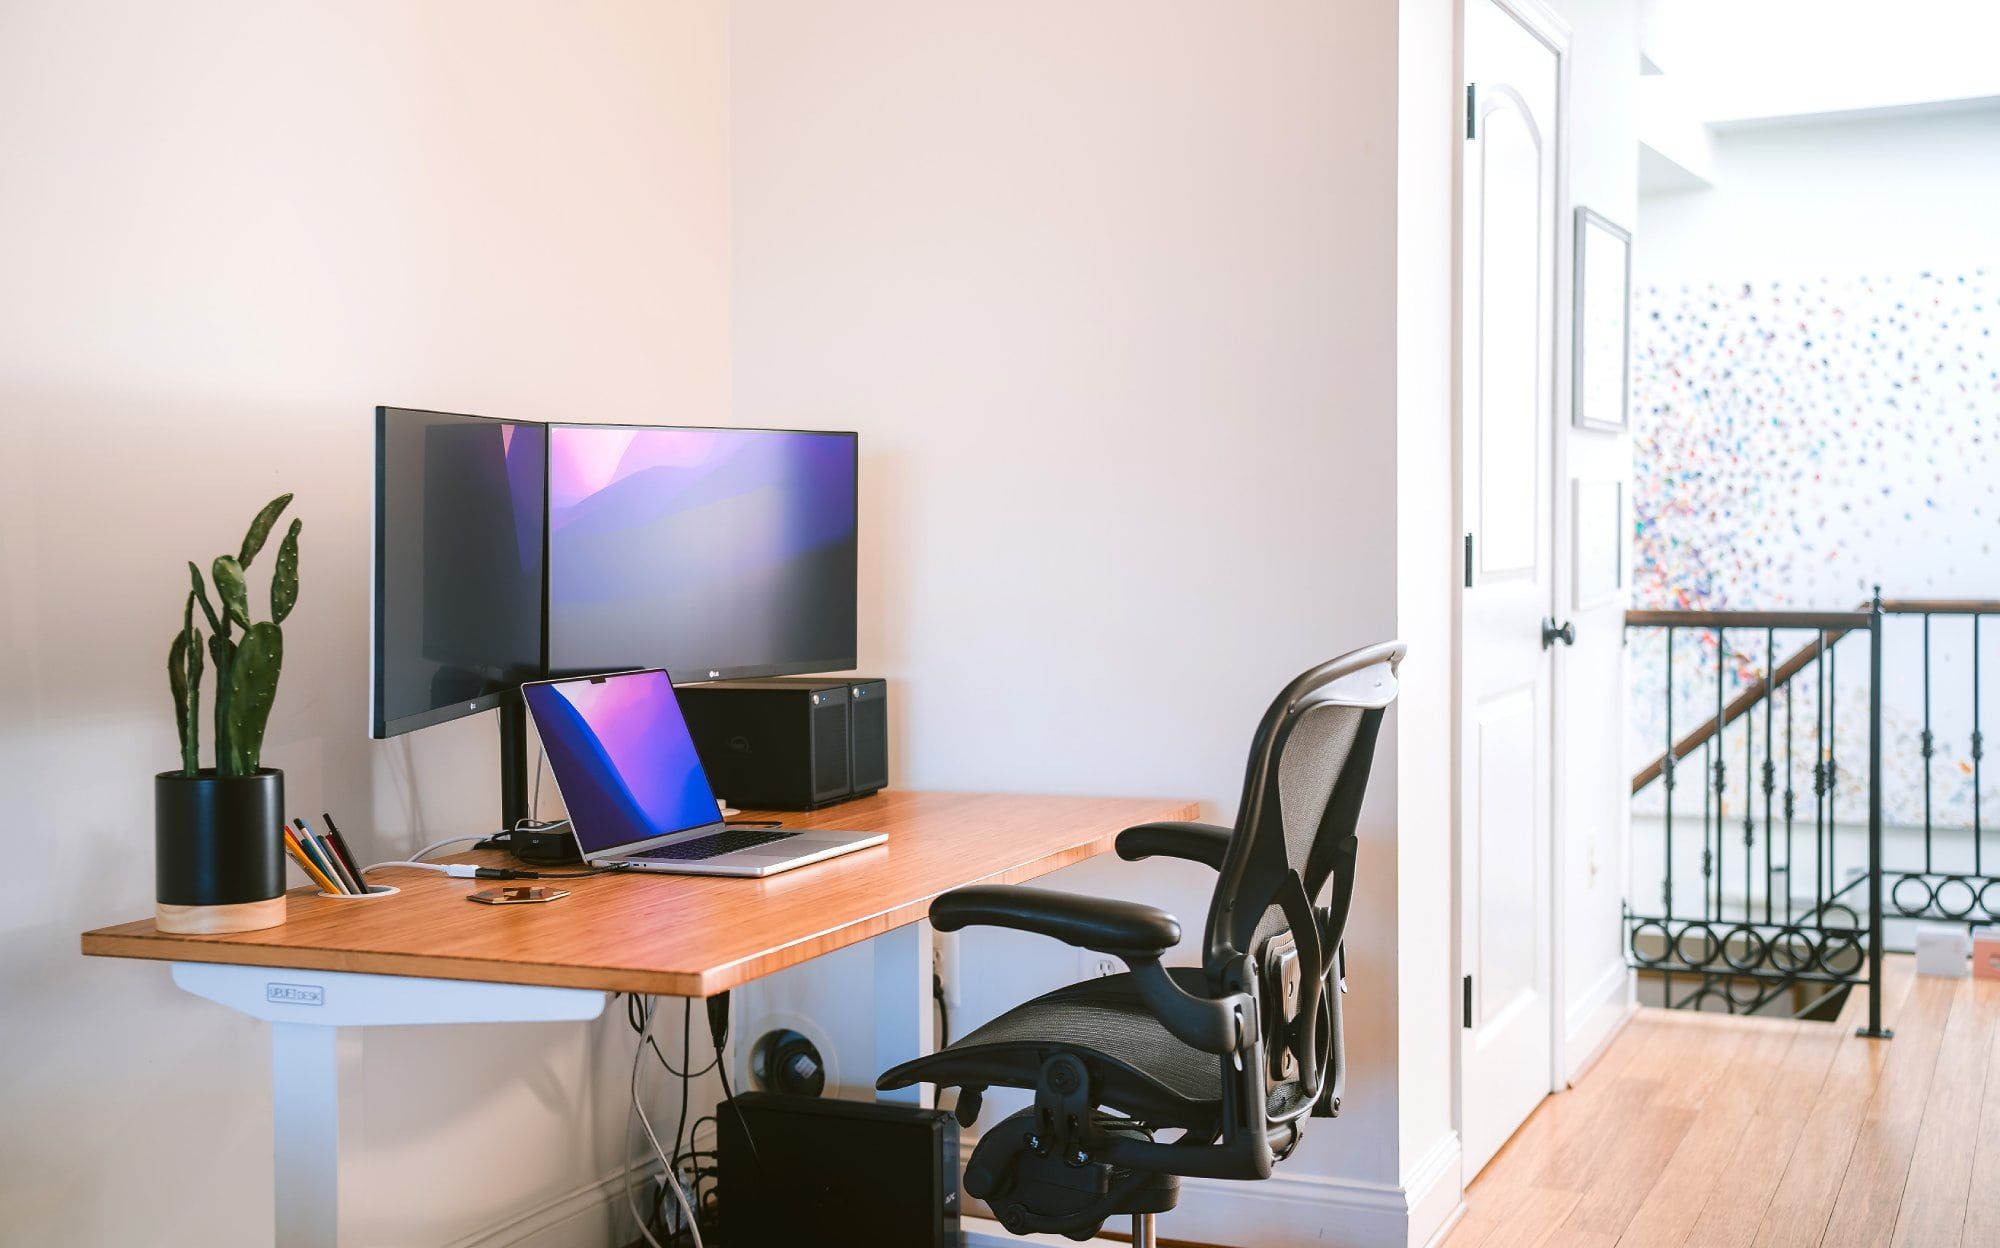 A modern home office setup with dual monitors, laptop on wooden desk, ergonomic chair, and a potted indoor plant